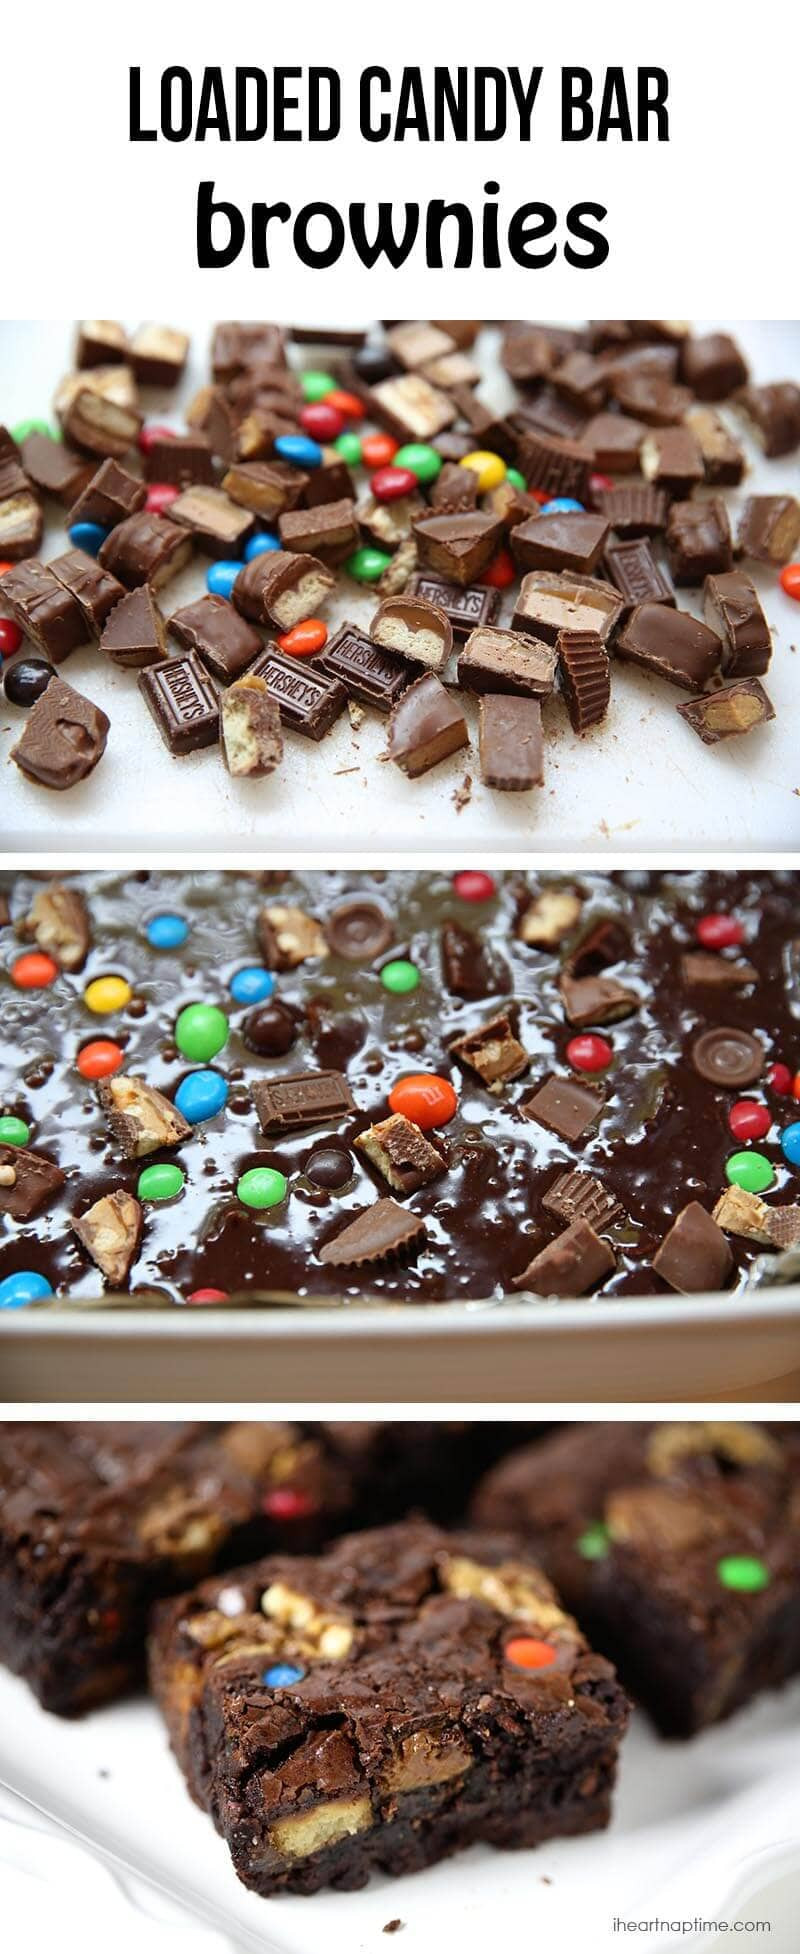 Candy Bar Brownies
 Loaded candy bar brownies I Heart Nap Time